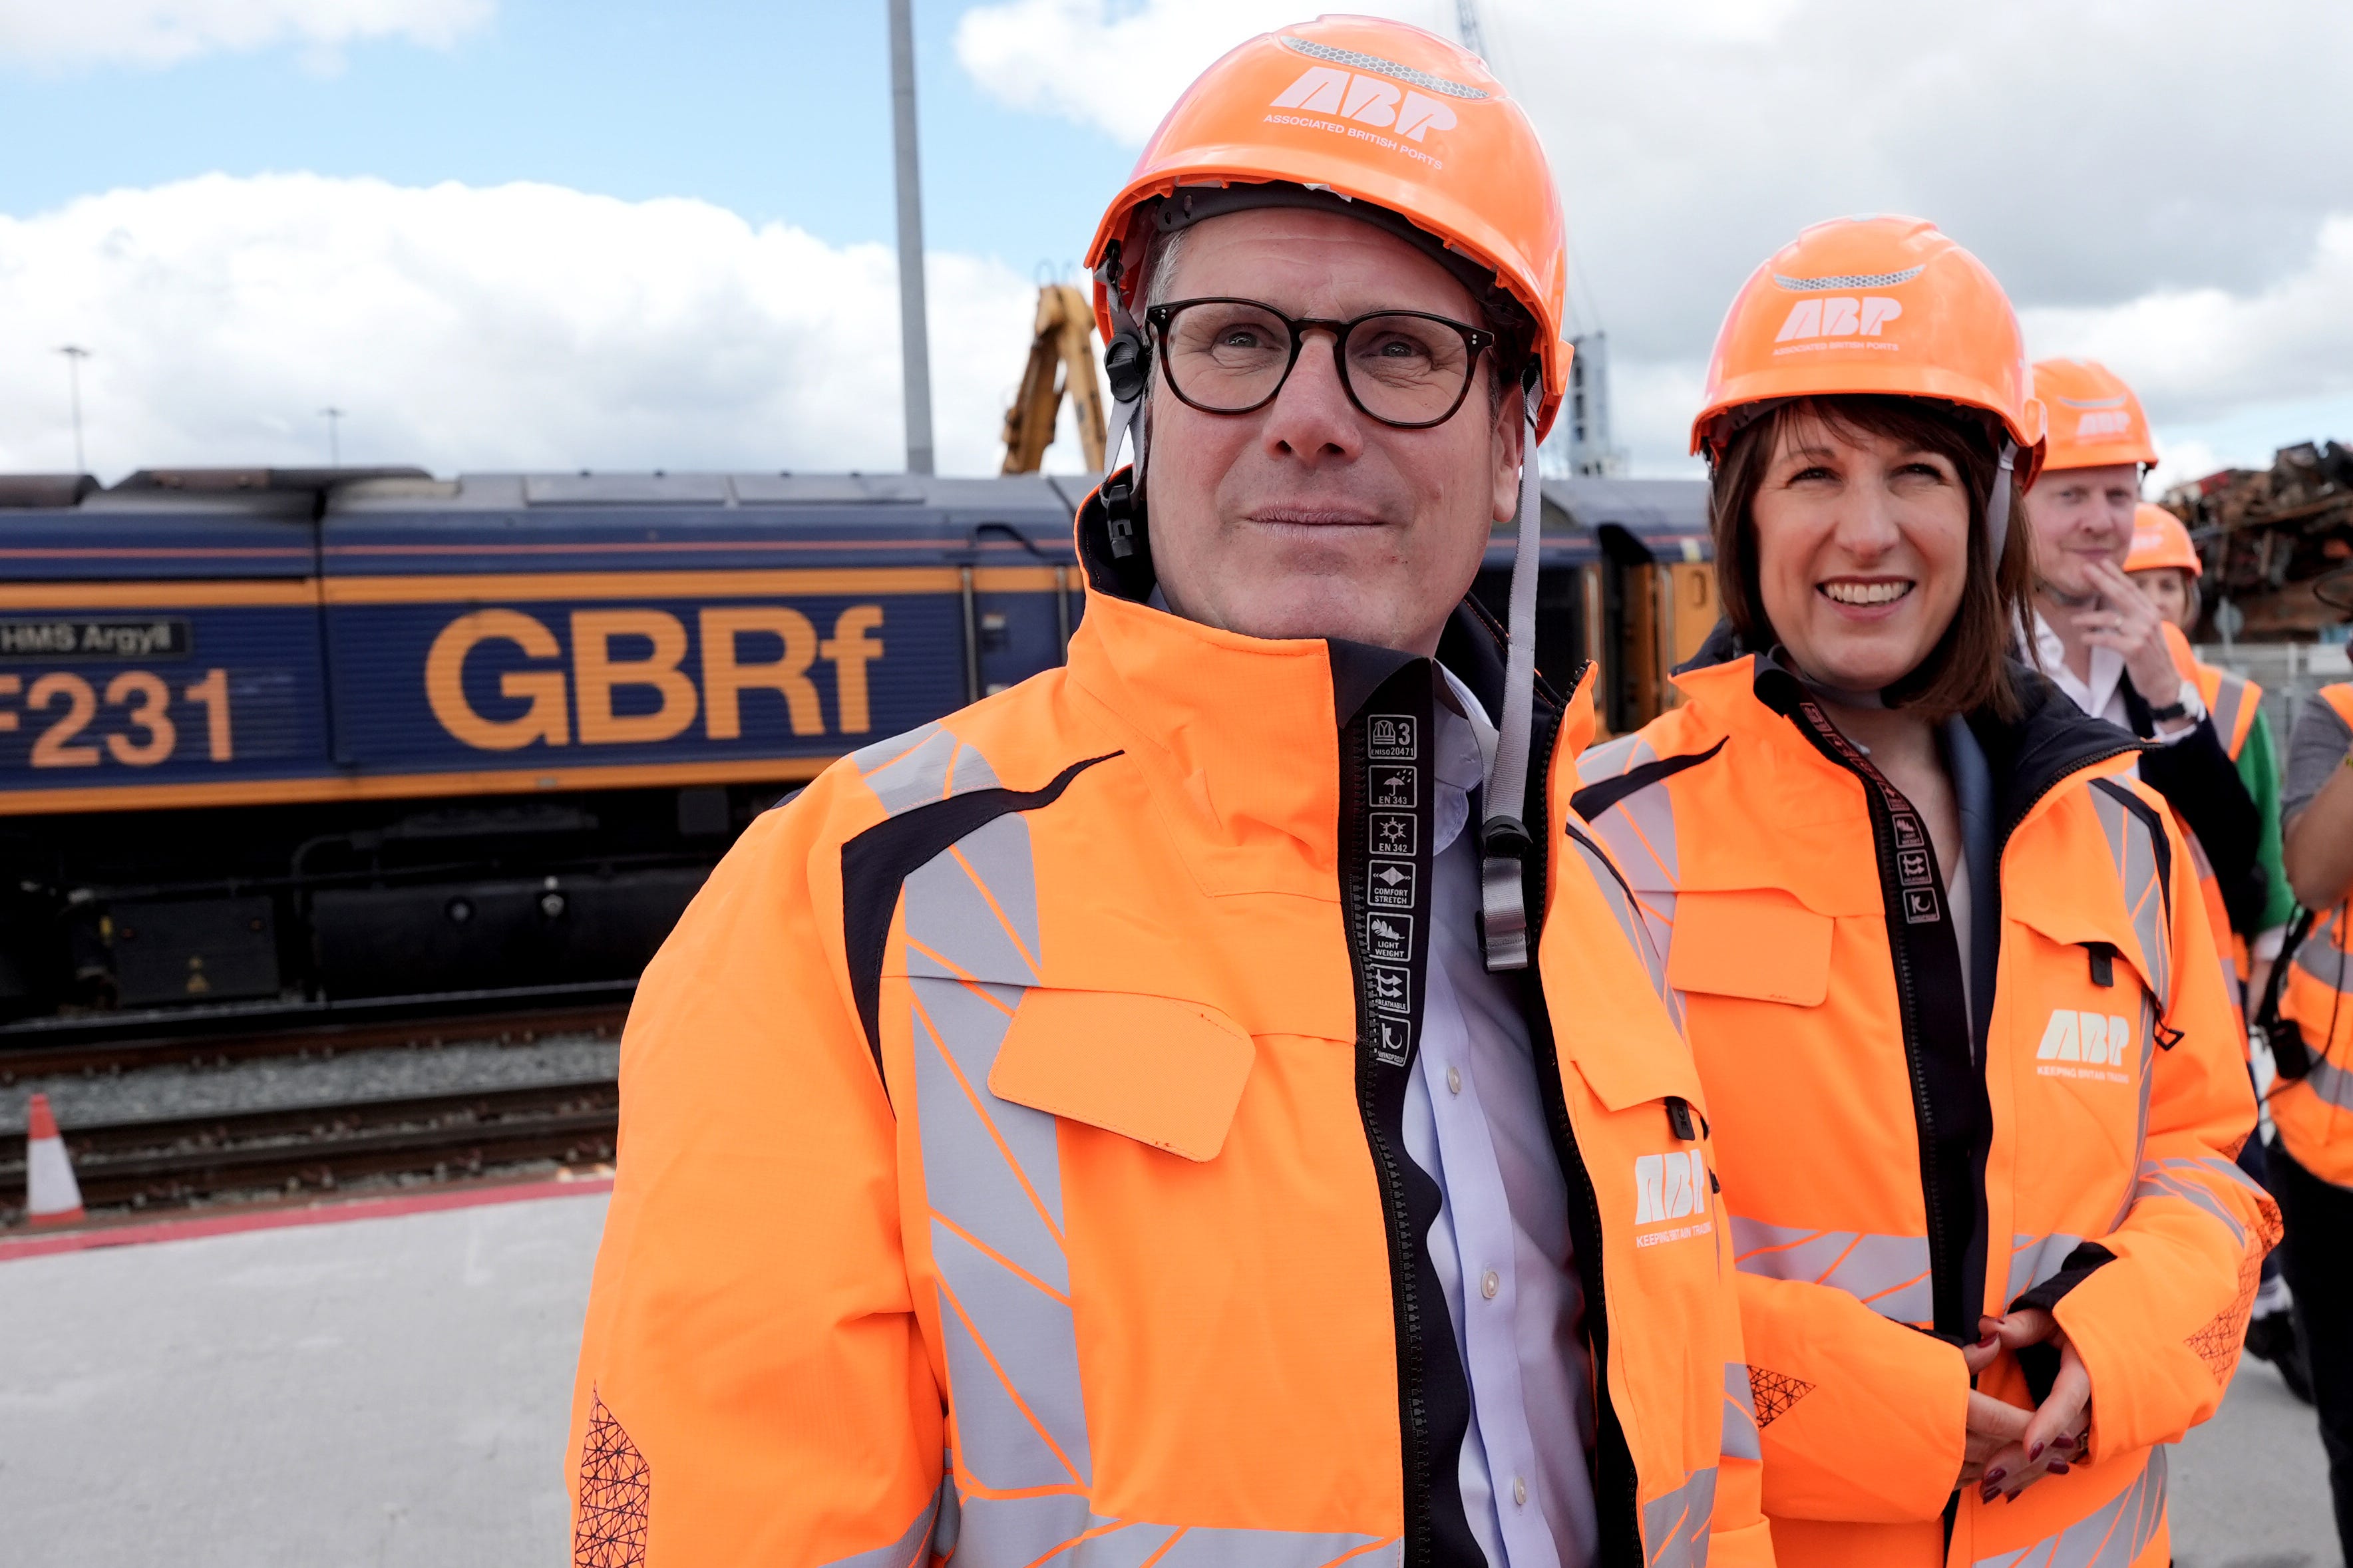 Labour Party leader Sir Keir Starmer and shadow chancellor Rachel Reeves visited Ocean Gate, Eastern Docks, in Southampton (Stefan Rousseau/PA)